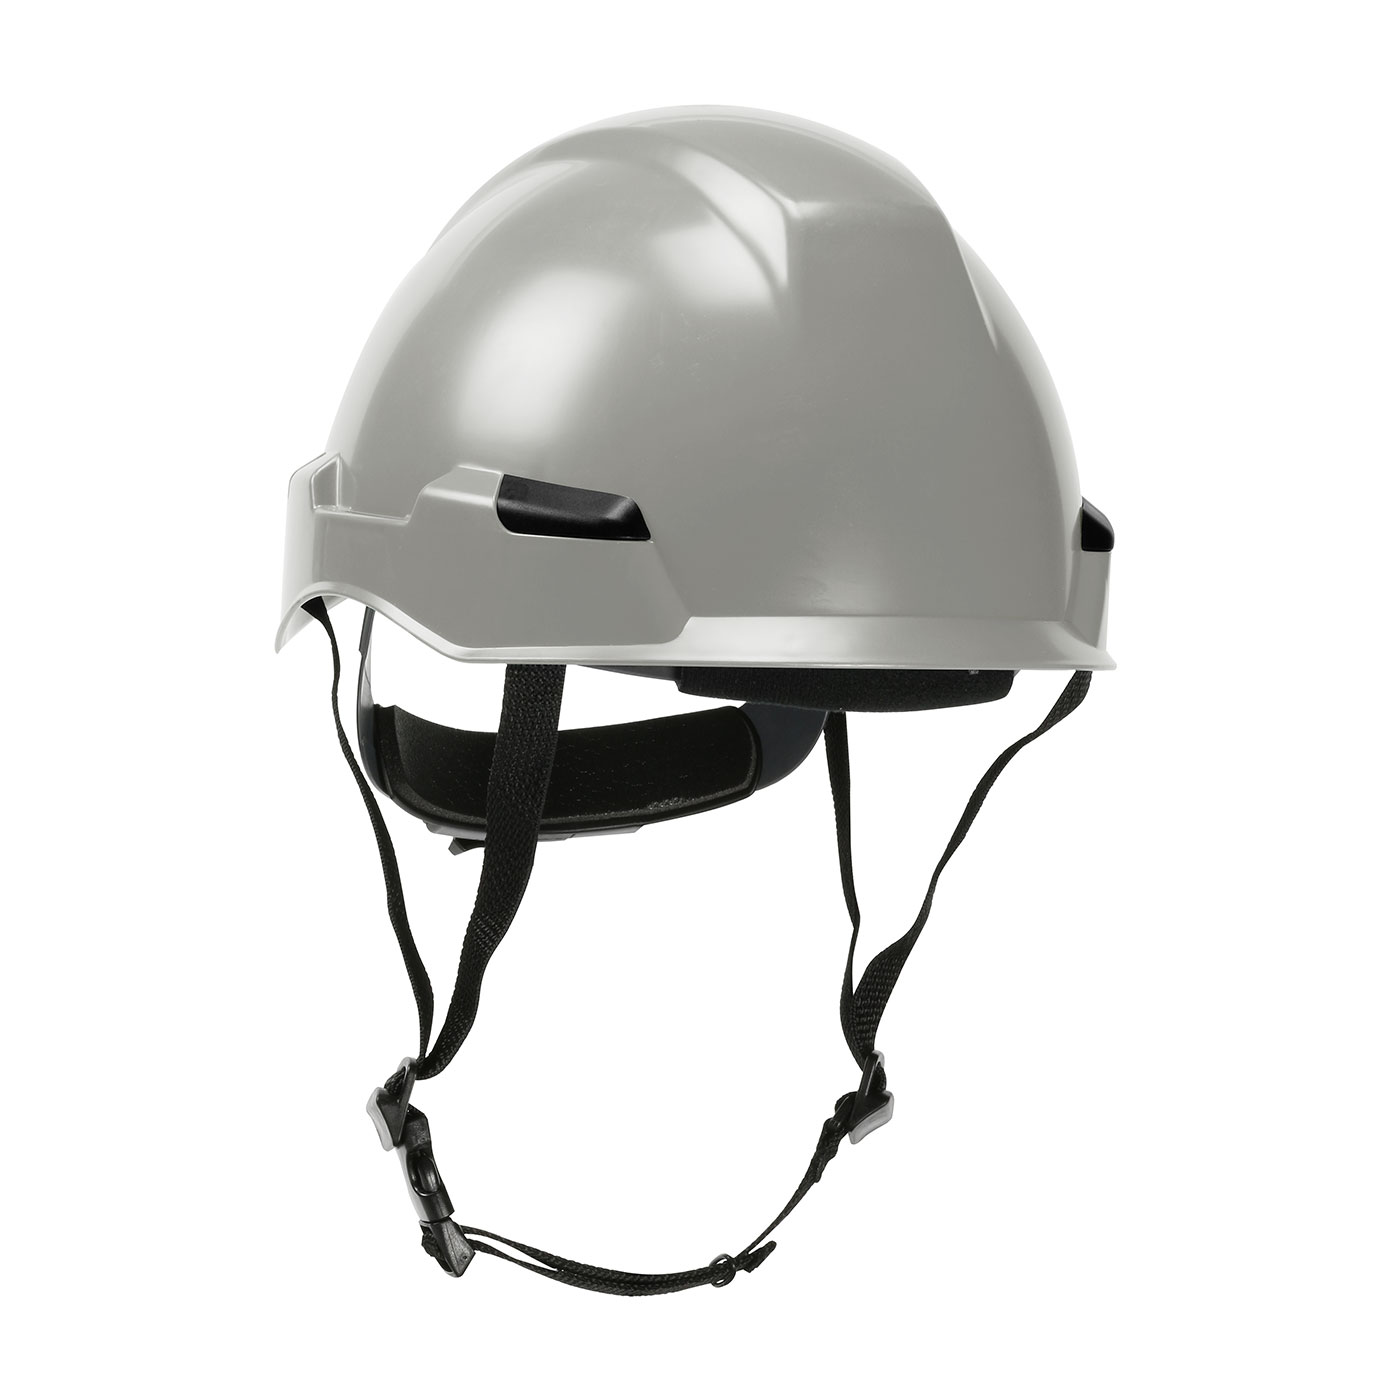 280-HP142R PIP® Dynamic Rocky™ Industrial Climbing Helmet with Polycarbonate / ABS Shell, Hi-Density Foam Impact Liner, Nylon Suspension, Wheel Ratchet Adjustment and 4-Point Chin Strap- Gray